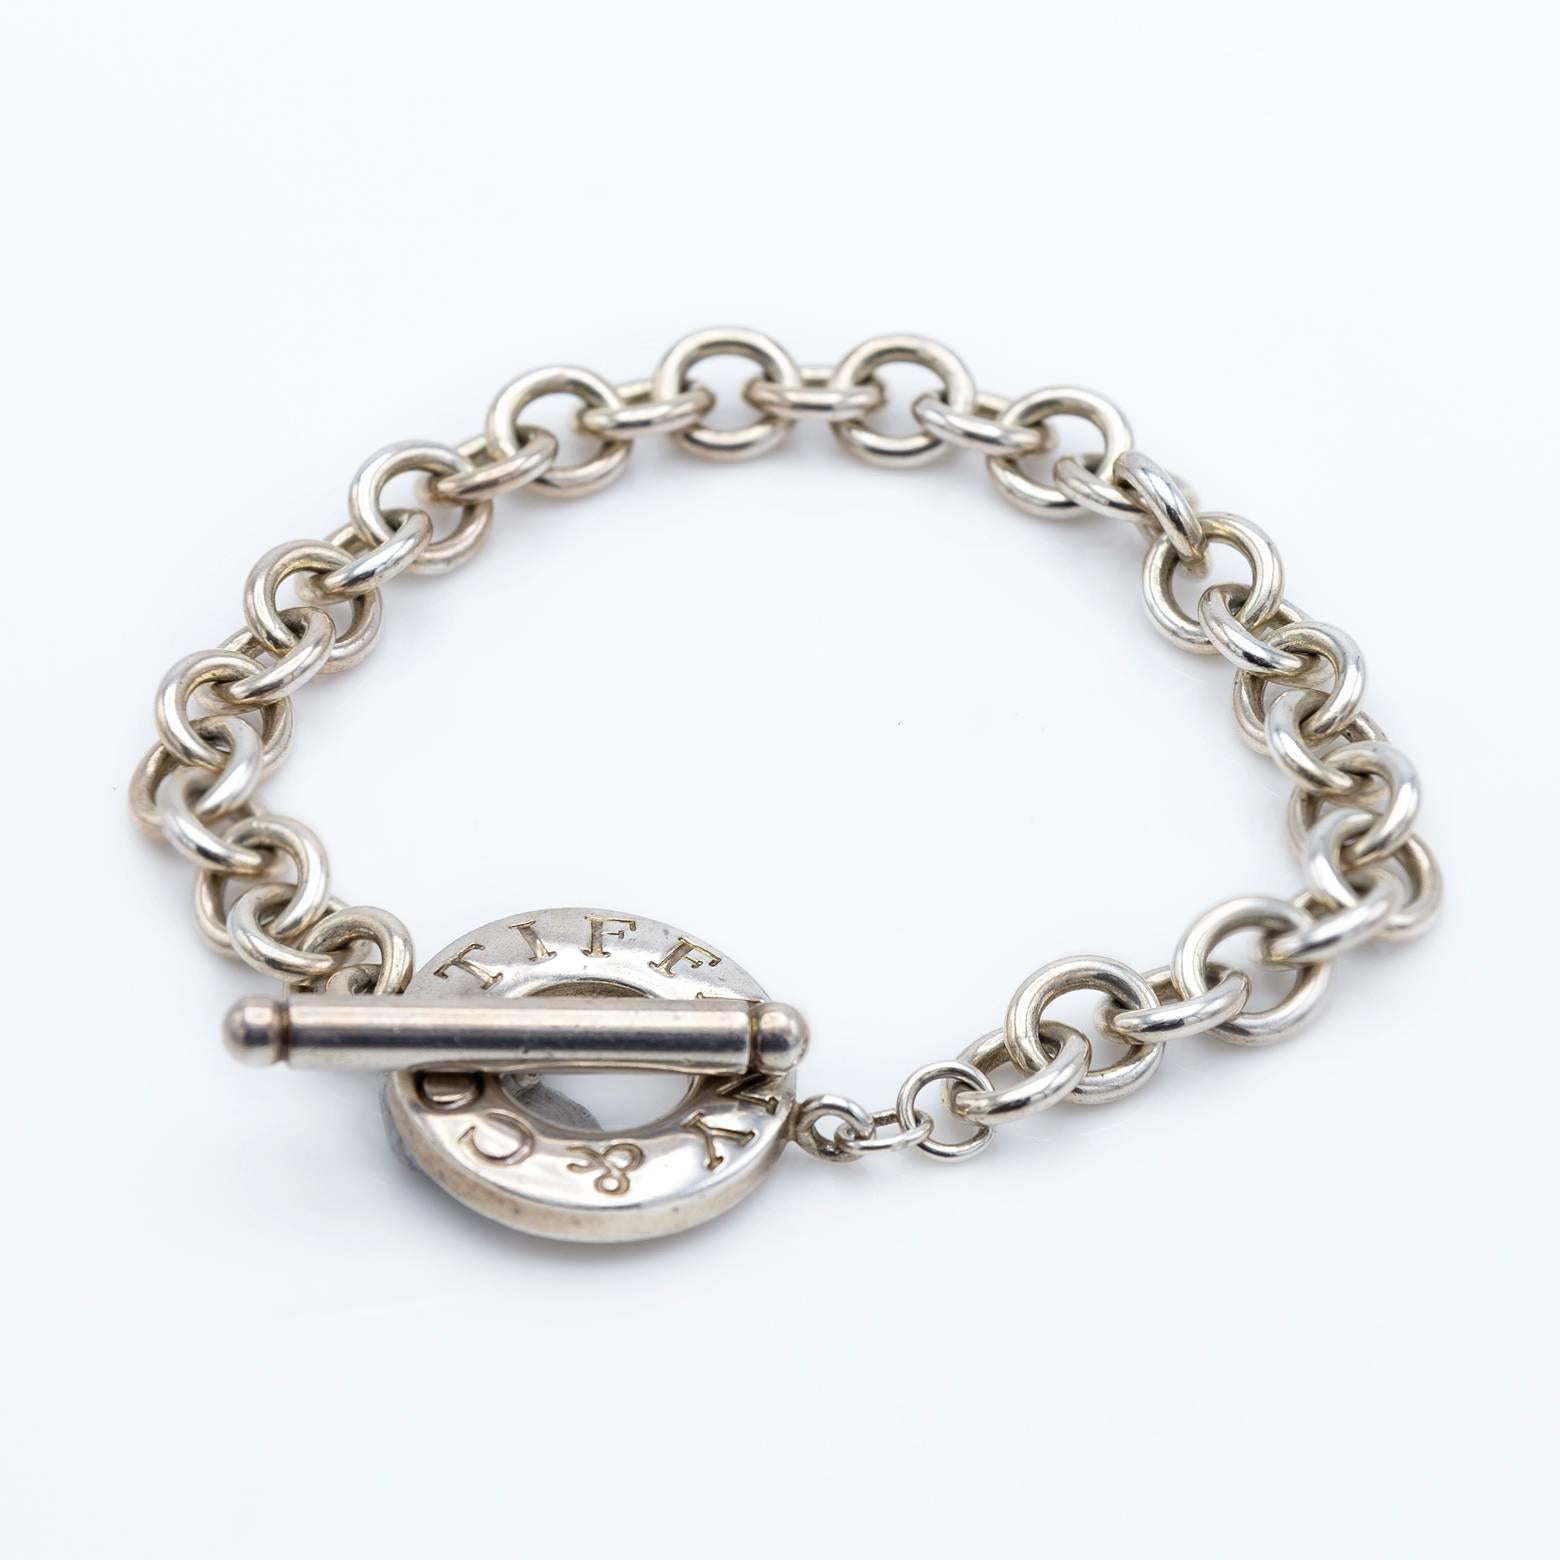 Classic and fun Tiffany & Co. Bracelet. Easily worn and comfortable this Tiffany and Co. bracelet is a must have. It's timeless, fashionable and exciting to wear as it adds fashion to any outfit. 